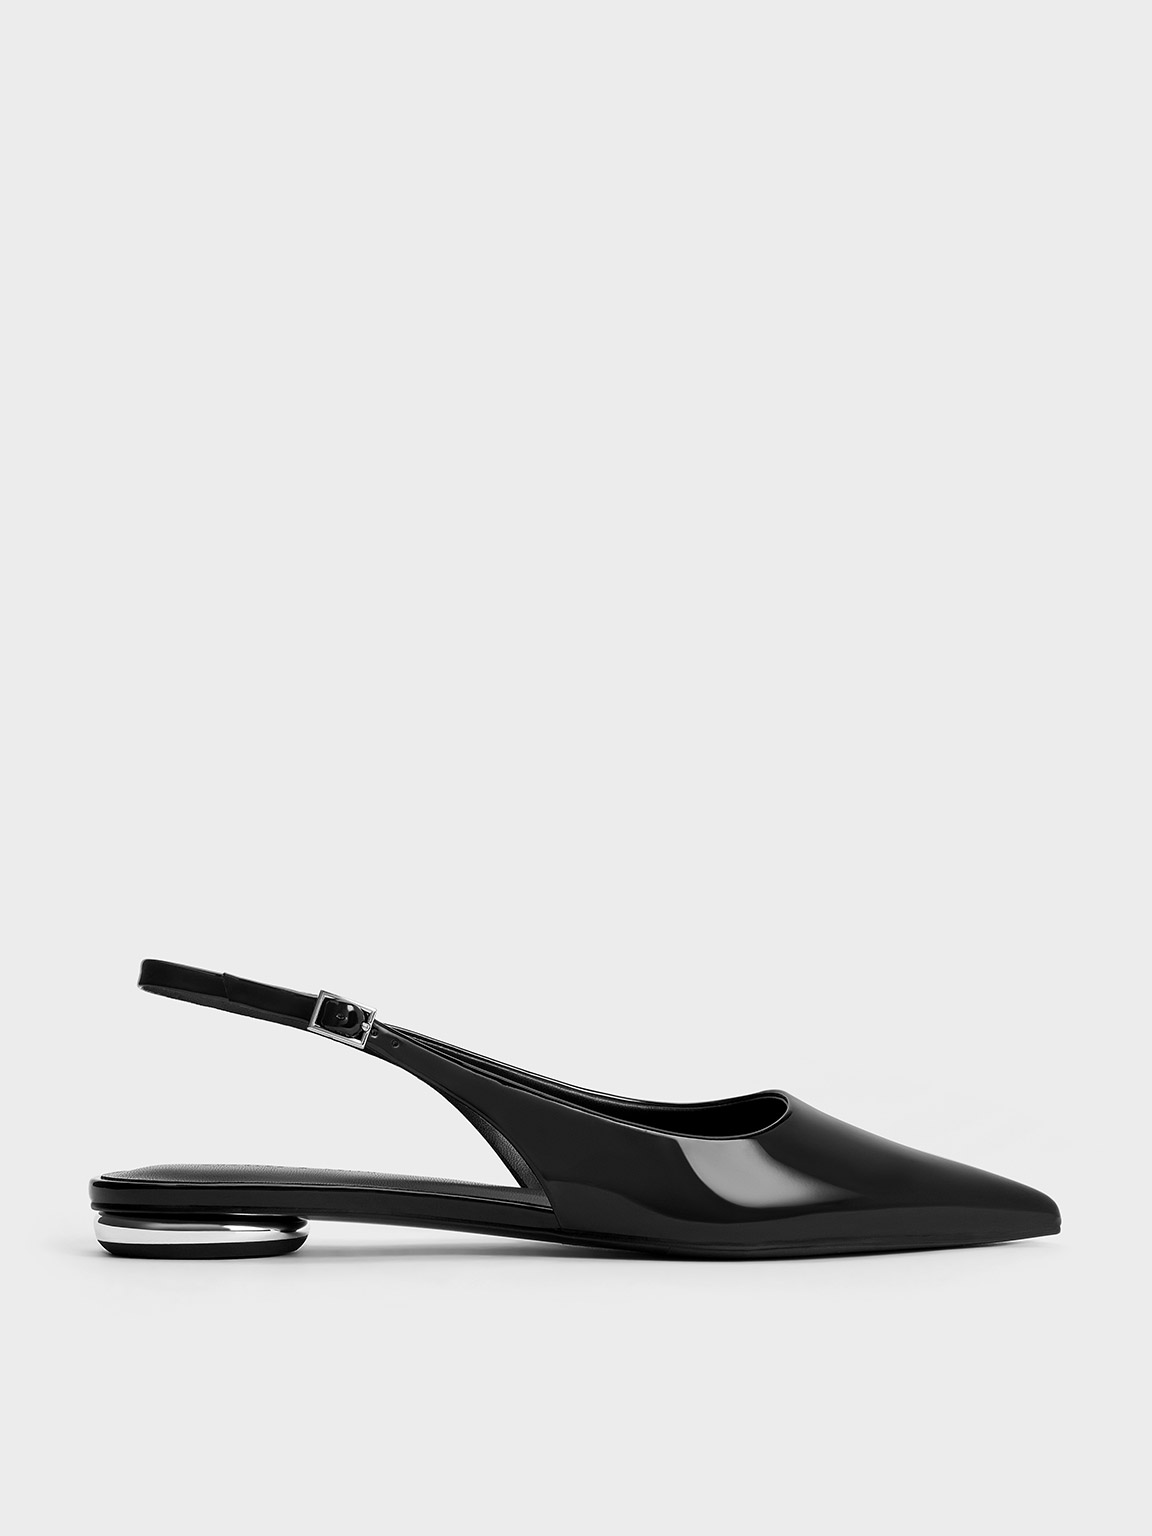 Black Patent Pointed-Toe Slingback Flats - CHARLES & KEITH UK